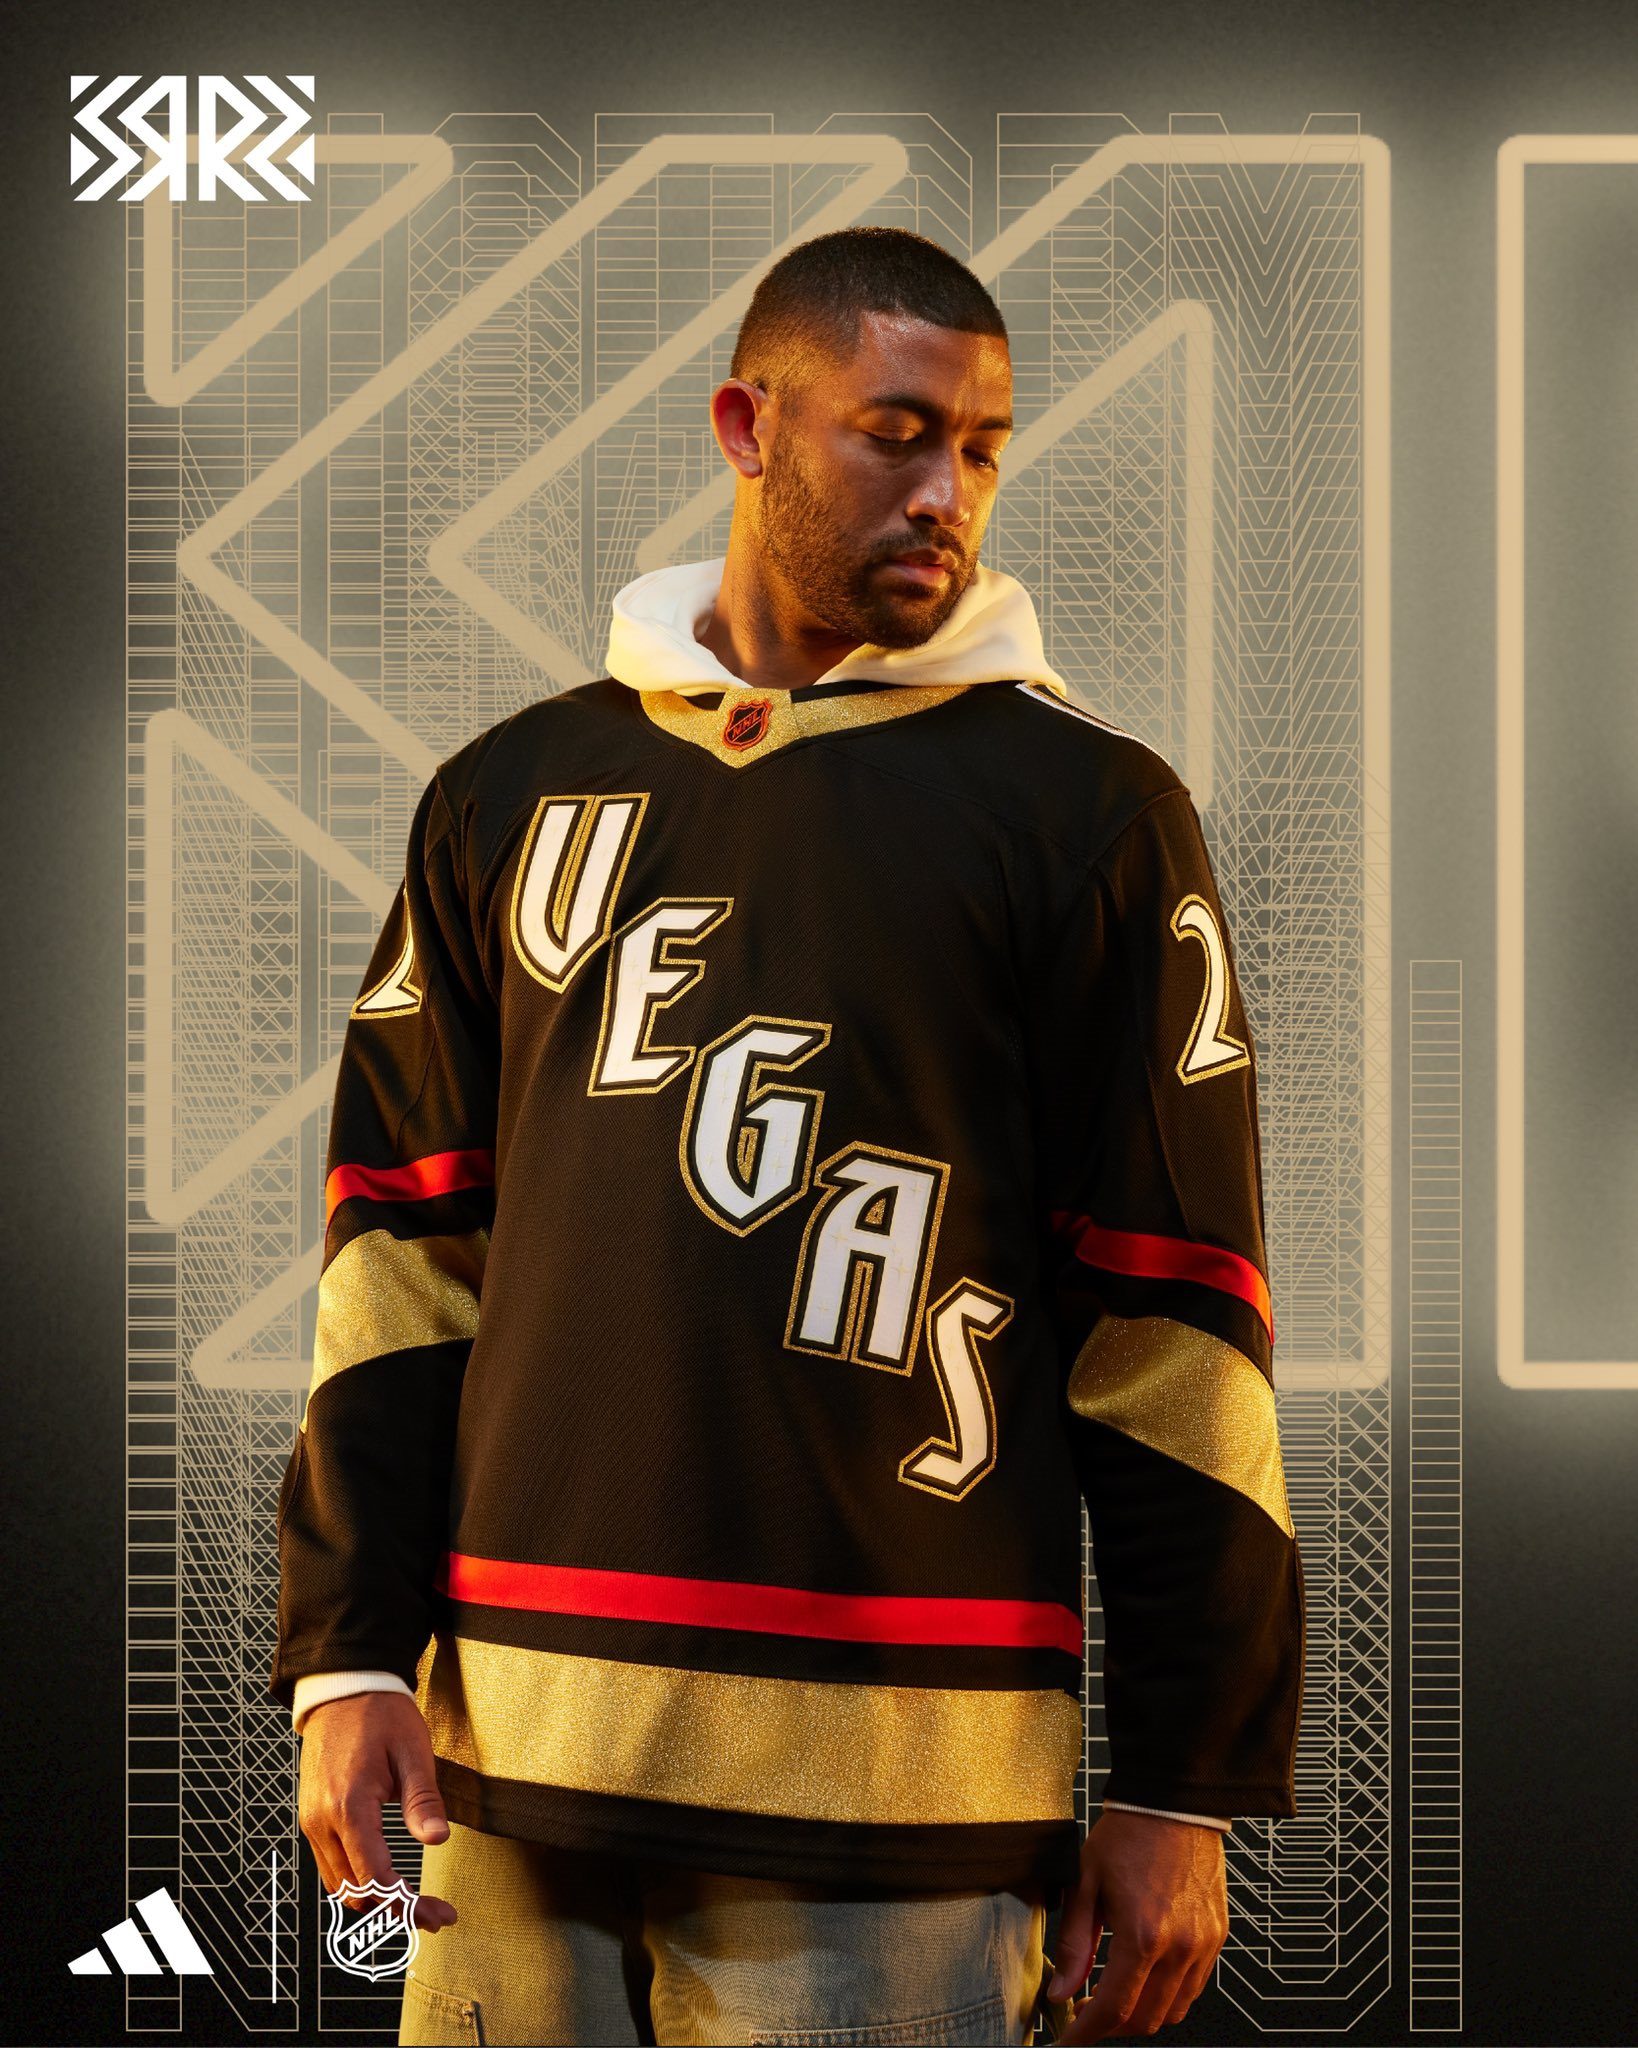 THE JERSEY UPDATE! REVERSE RETRO 2.0 IS HERE! (NHL 23 Roster Update) 